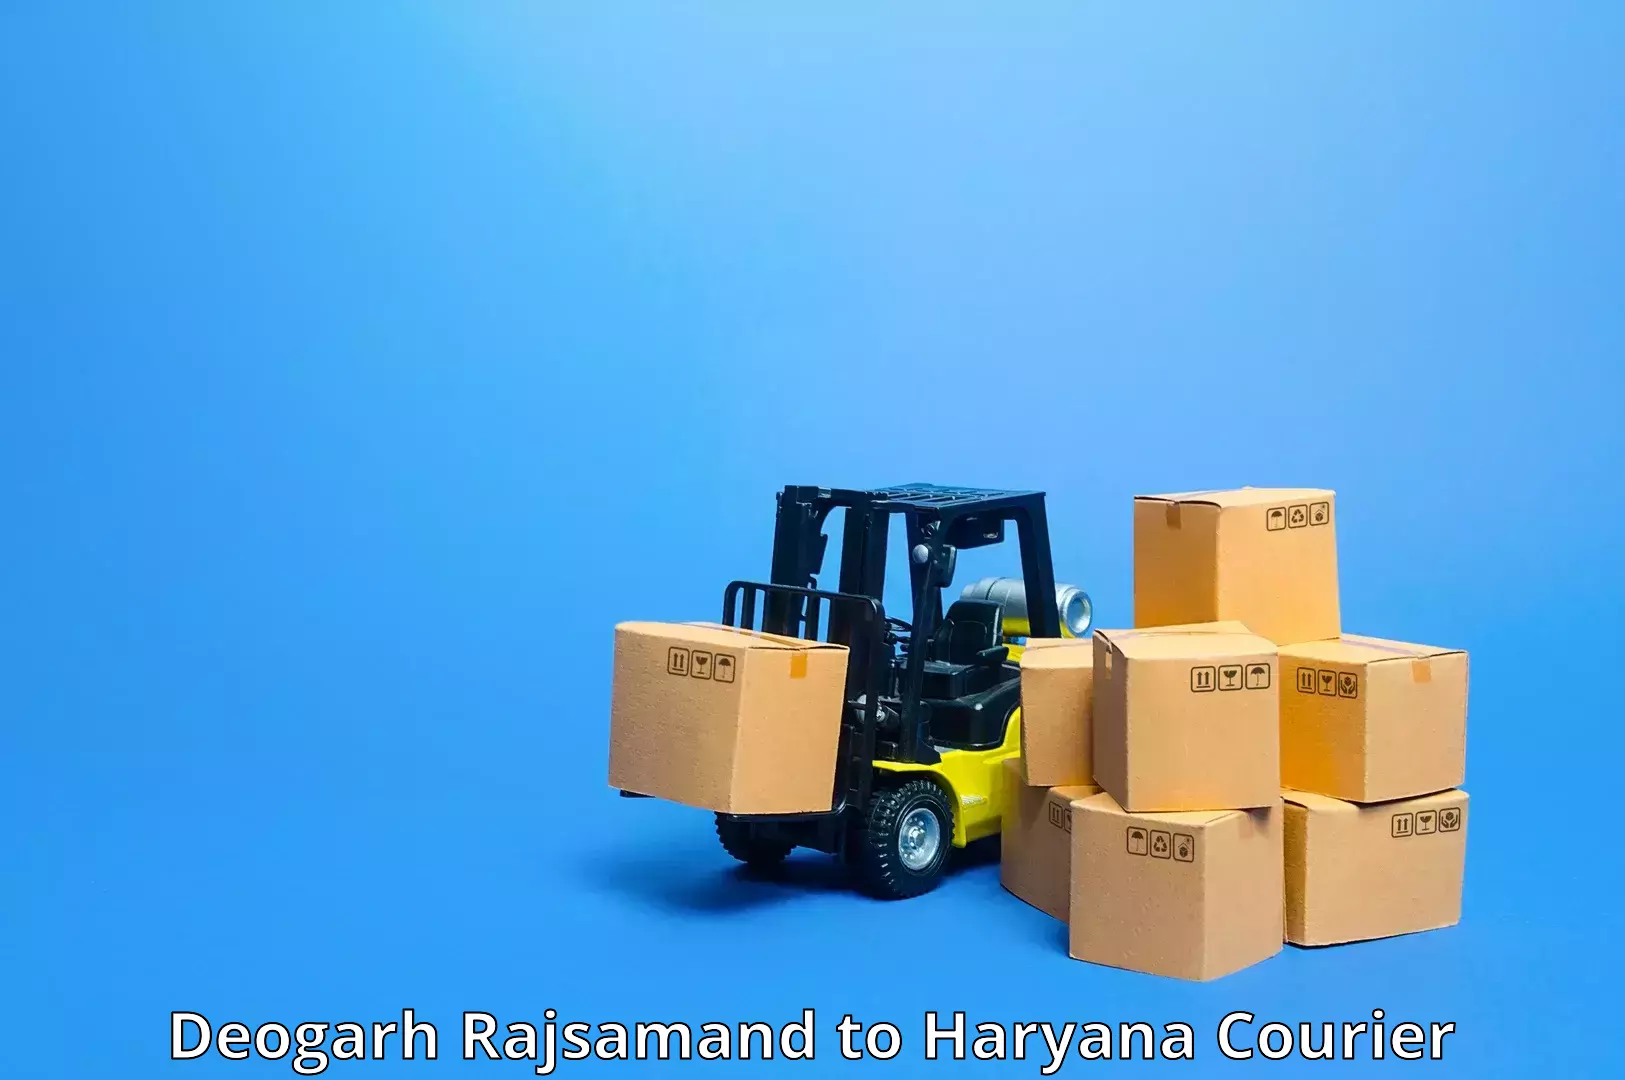 High-speed delivery Deogarh Rajsamand to Dharuhera